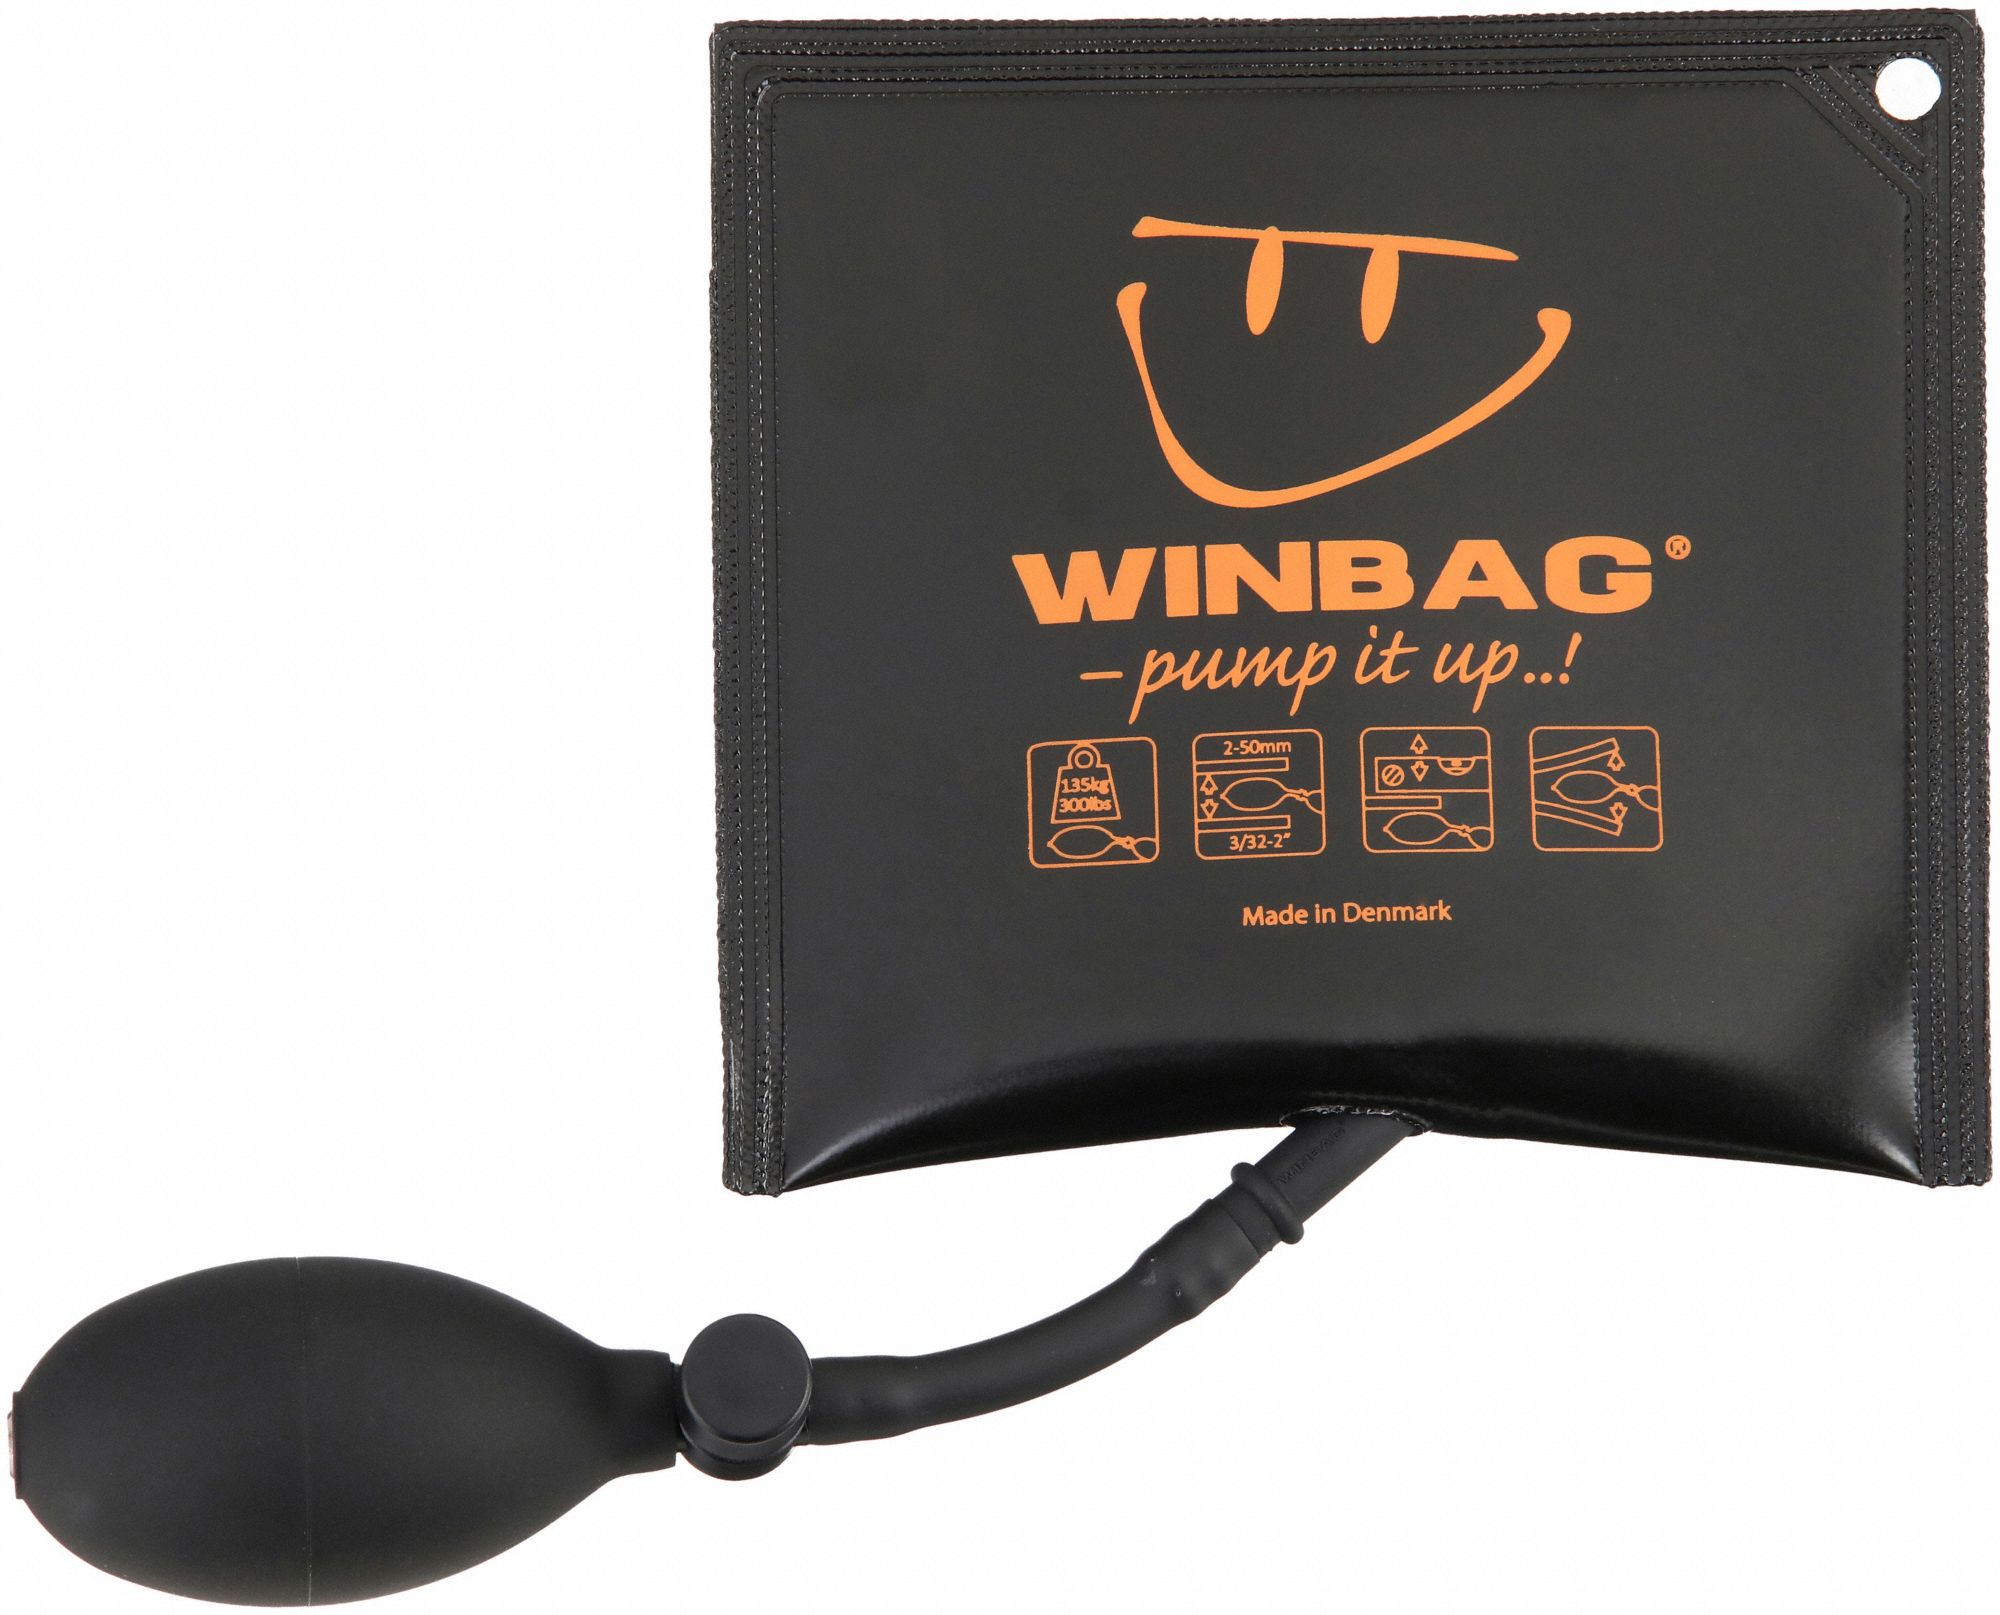 TREND I/WEDGE Winbag Air Wedge Pump Shim Inflatable for Door Window Fitting  Joinery Carpenter